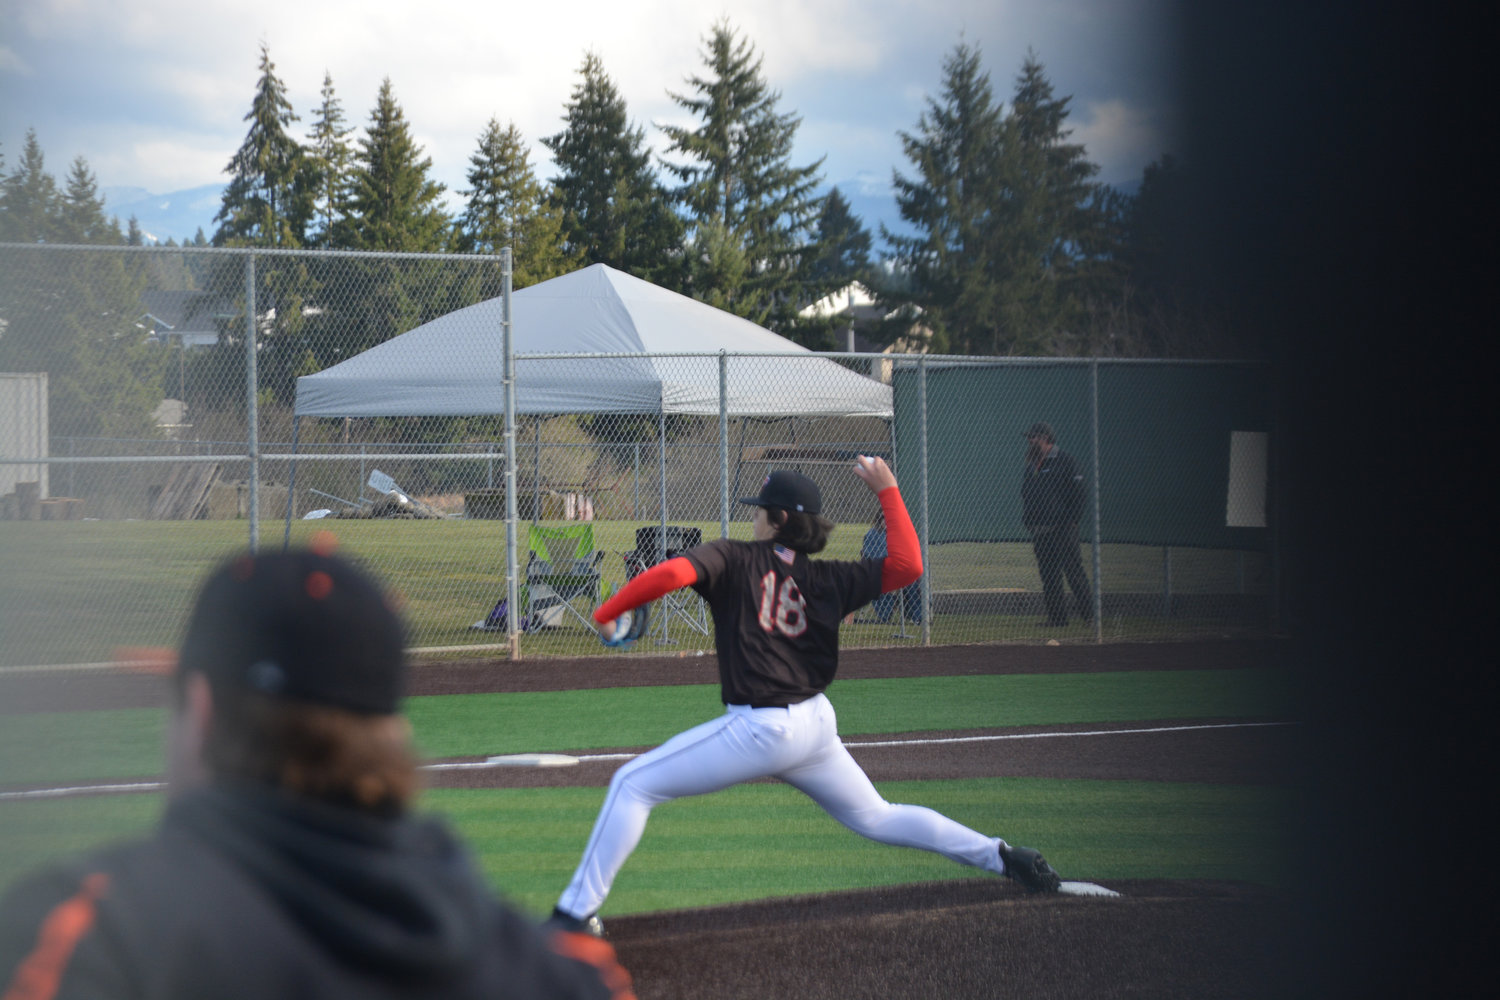 Freshman pitcher Landan Halterman delivers his first career pitch in his first start for Yelm at a game against Rainier on Friday, March 10.